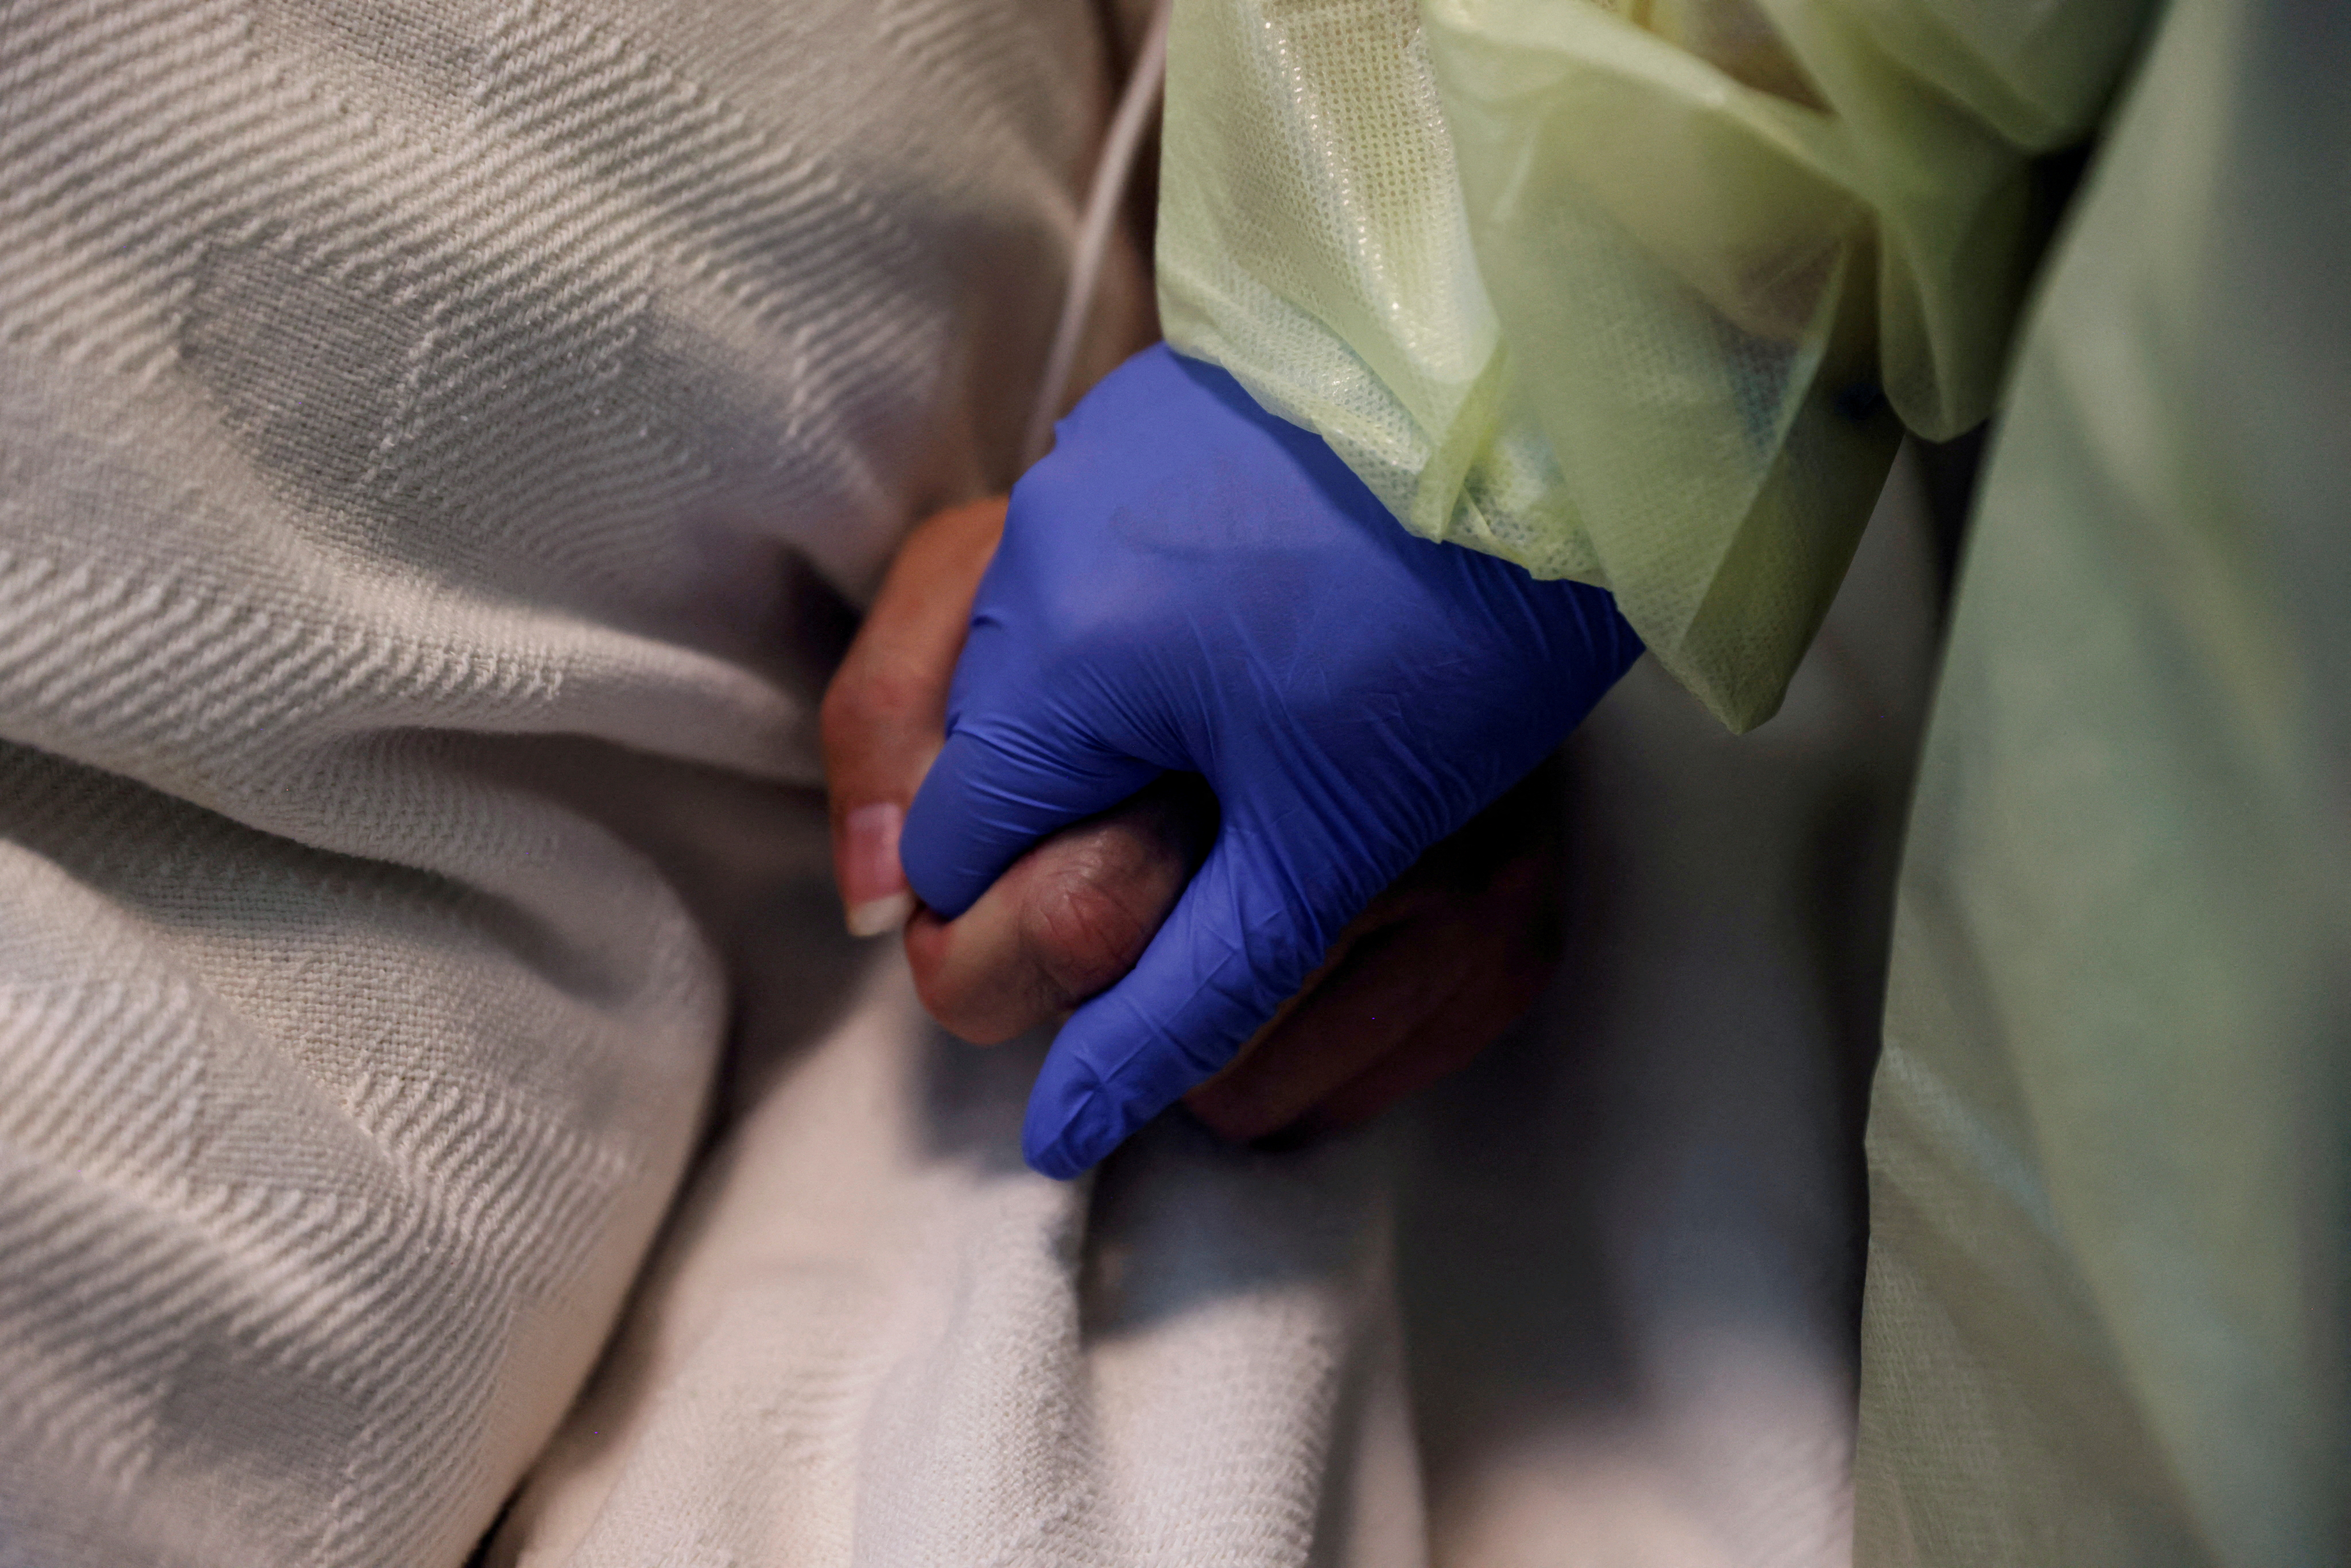 A woman in her personal protective equipment (PPE) gear holds the hand of a coronavirus disease (COVID-19) positive patient, in her isolation room at Madison Memorial Hospital in Rexburg, Idaho, U.S., October 28, 2021. REUTERS/Shannon Stapleton